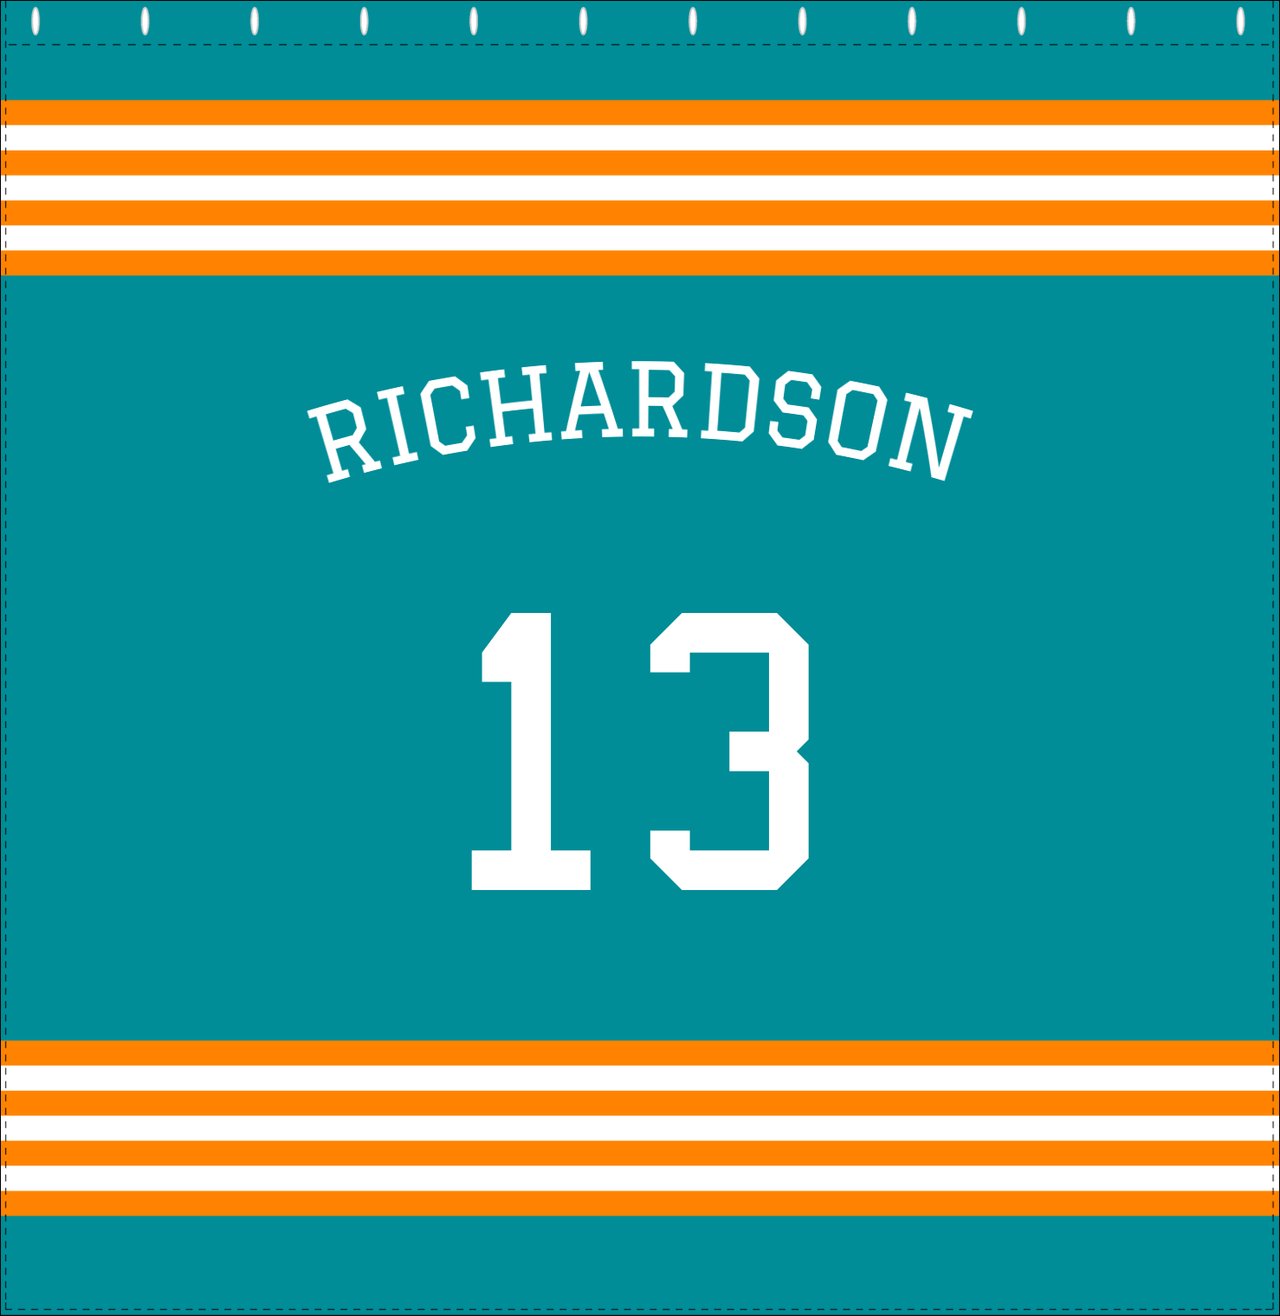 Personalized Jersey Number Shower Curtain with Arched Name - Teal & Orange - Triple Stripe - Decorate View